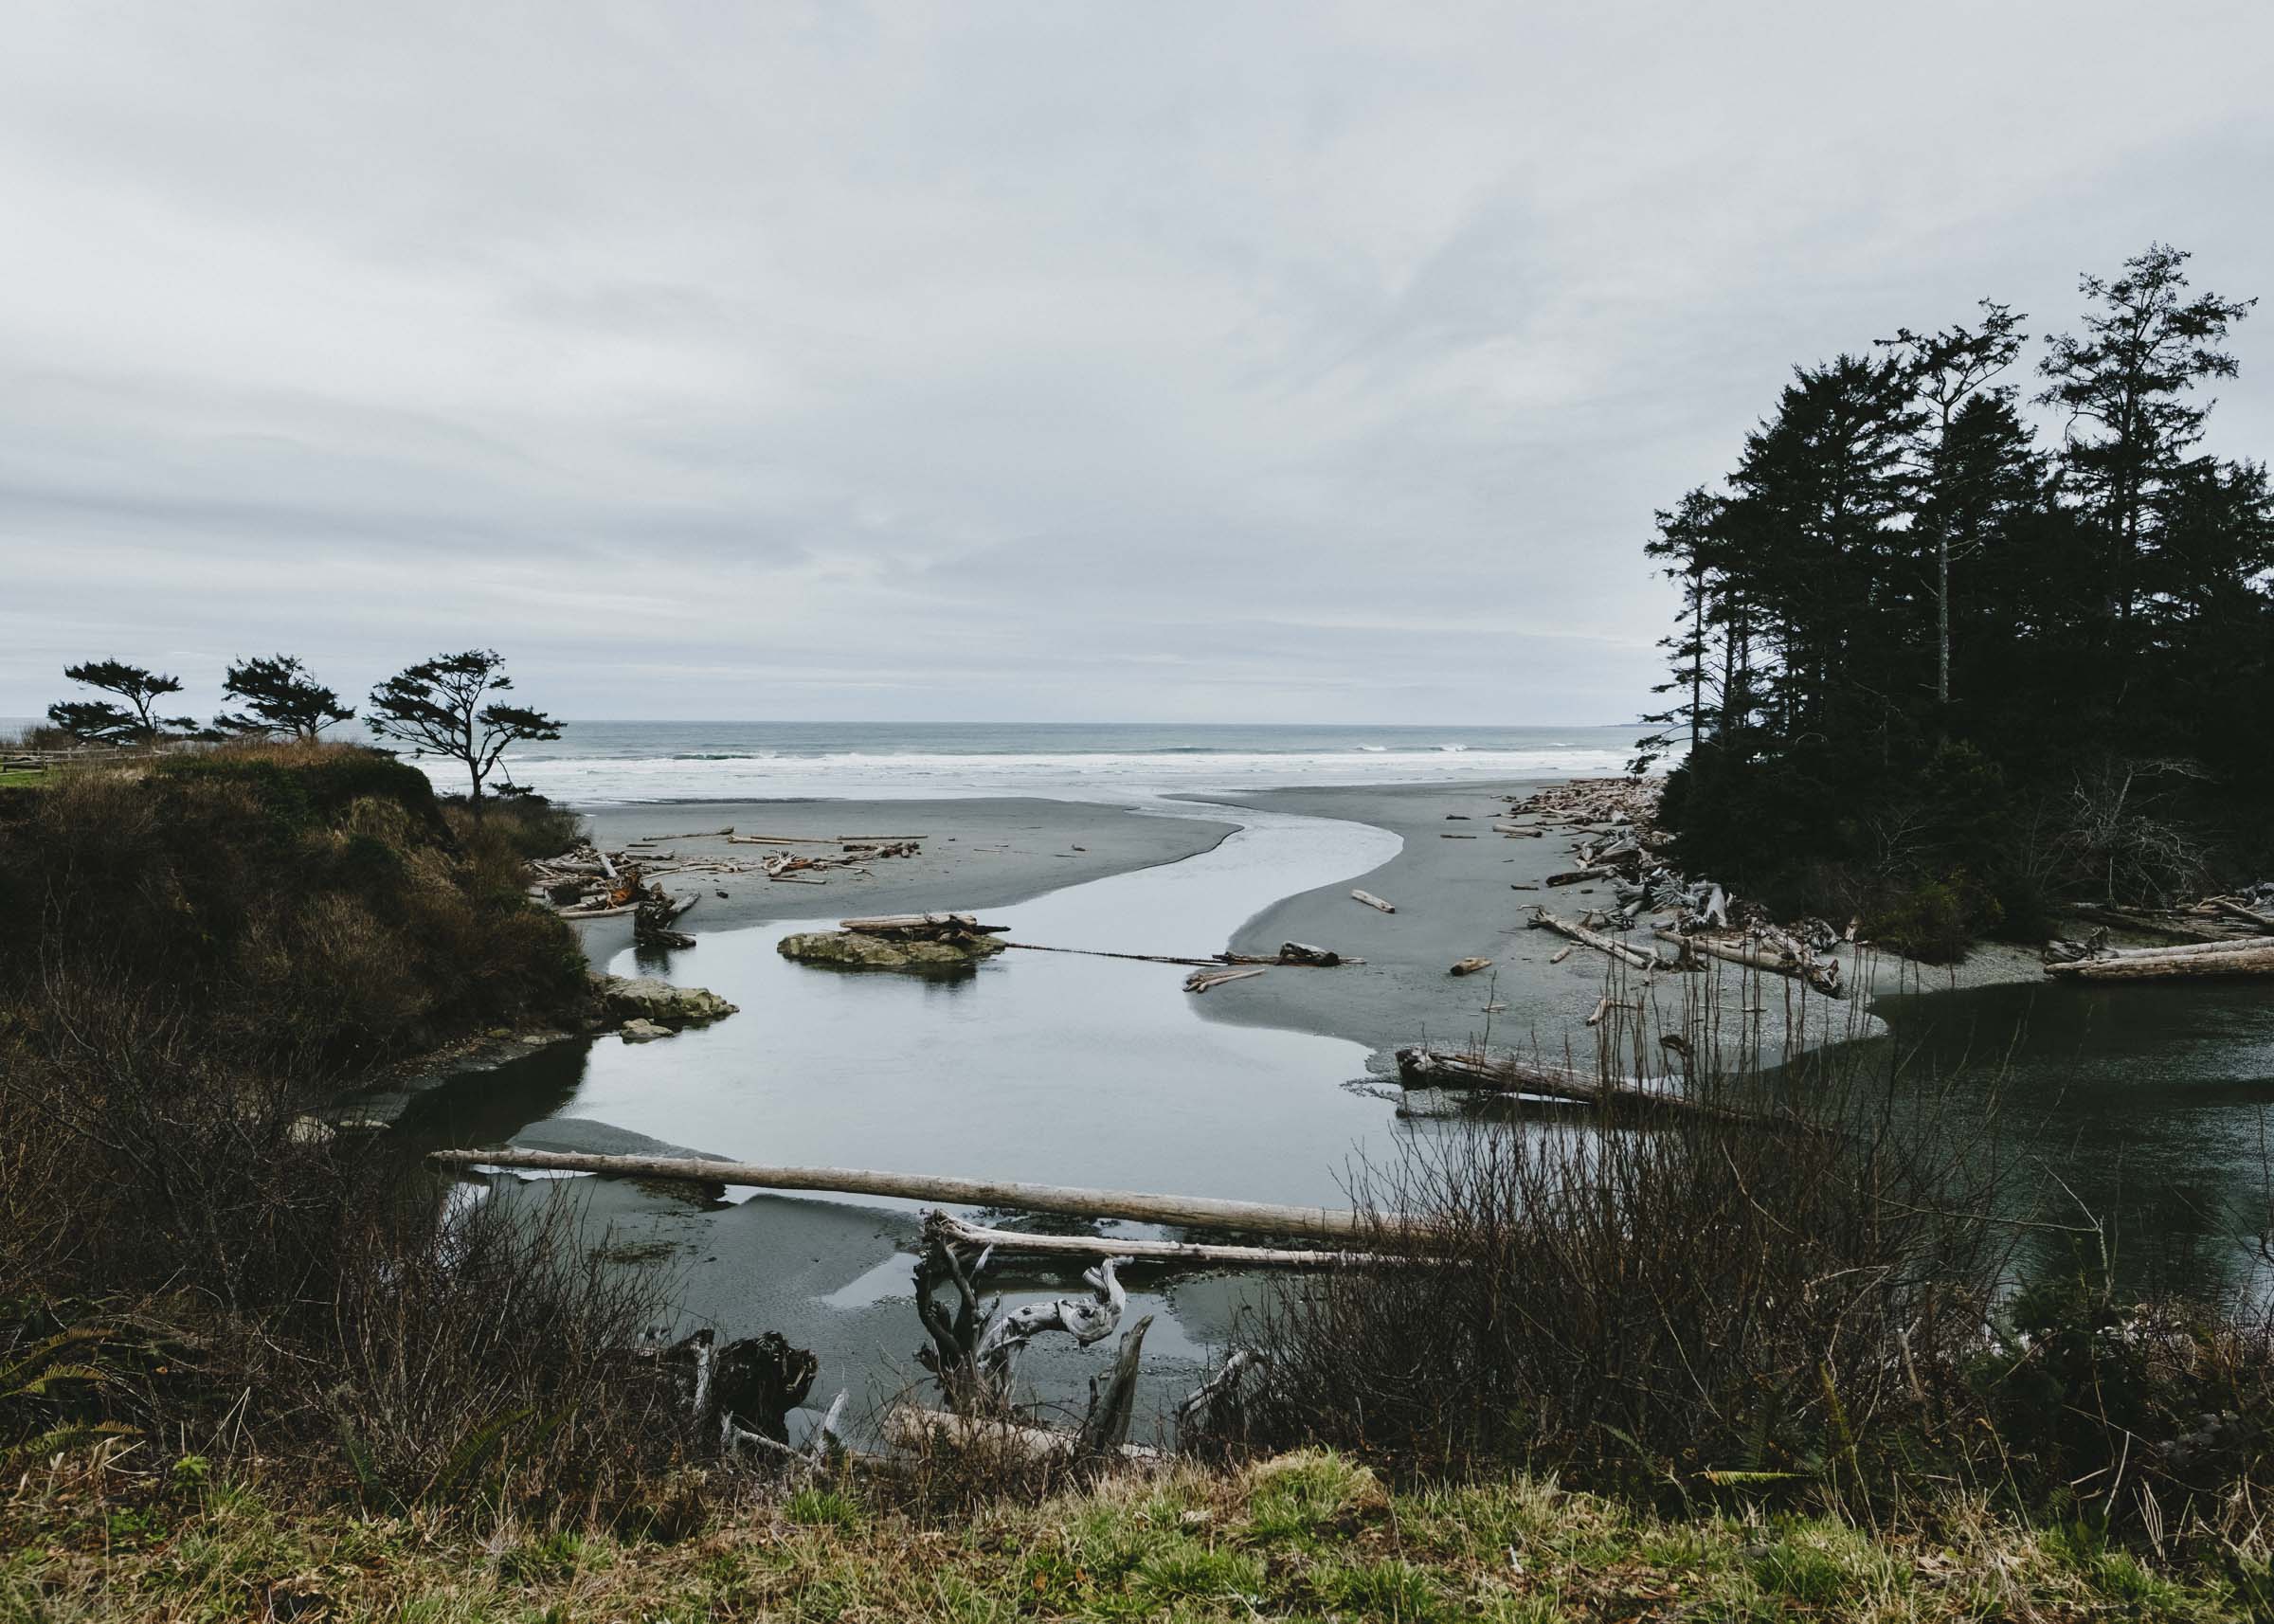 The view from Kalaloch Lodge, WA